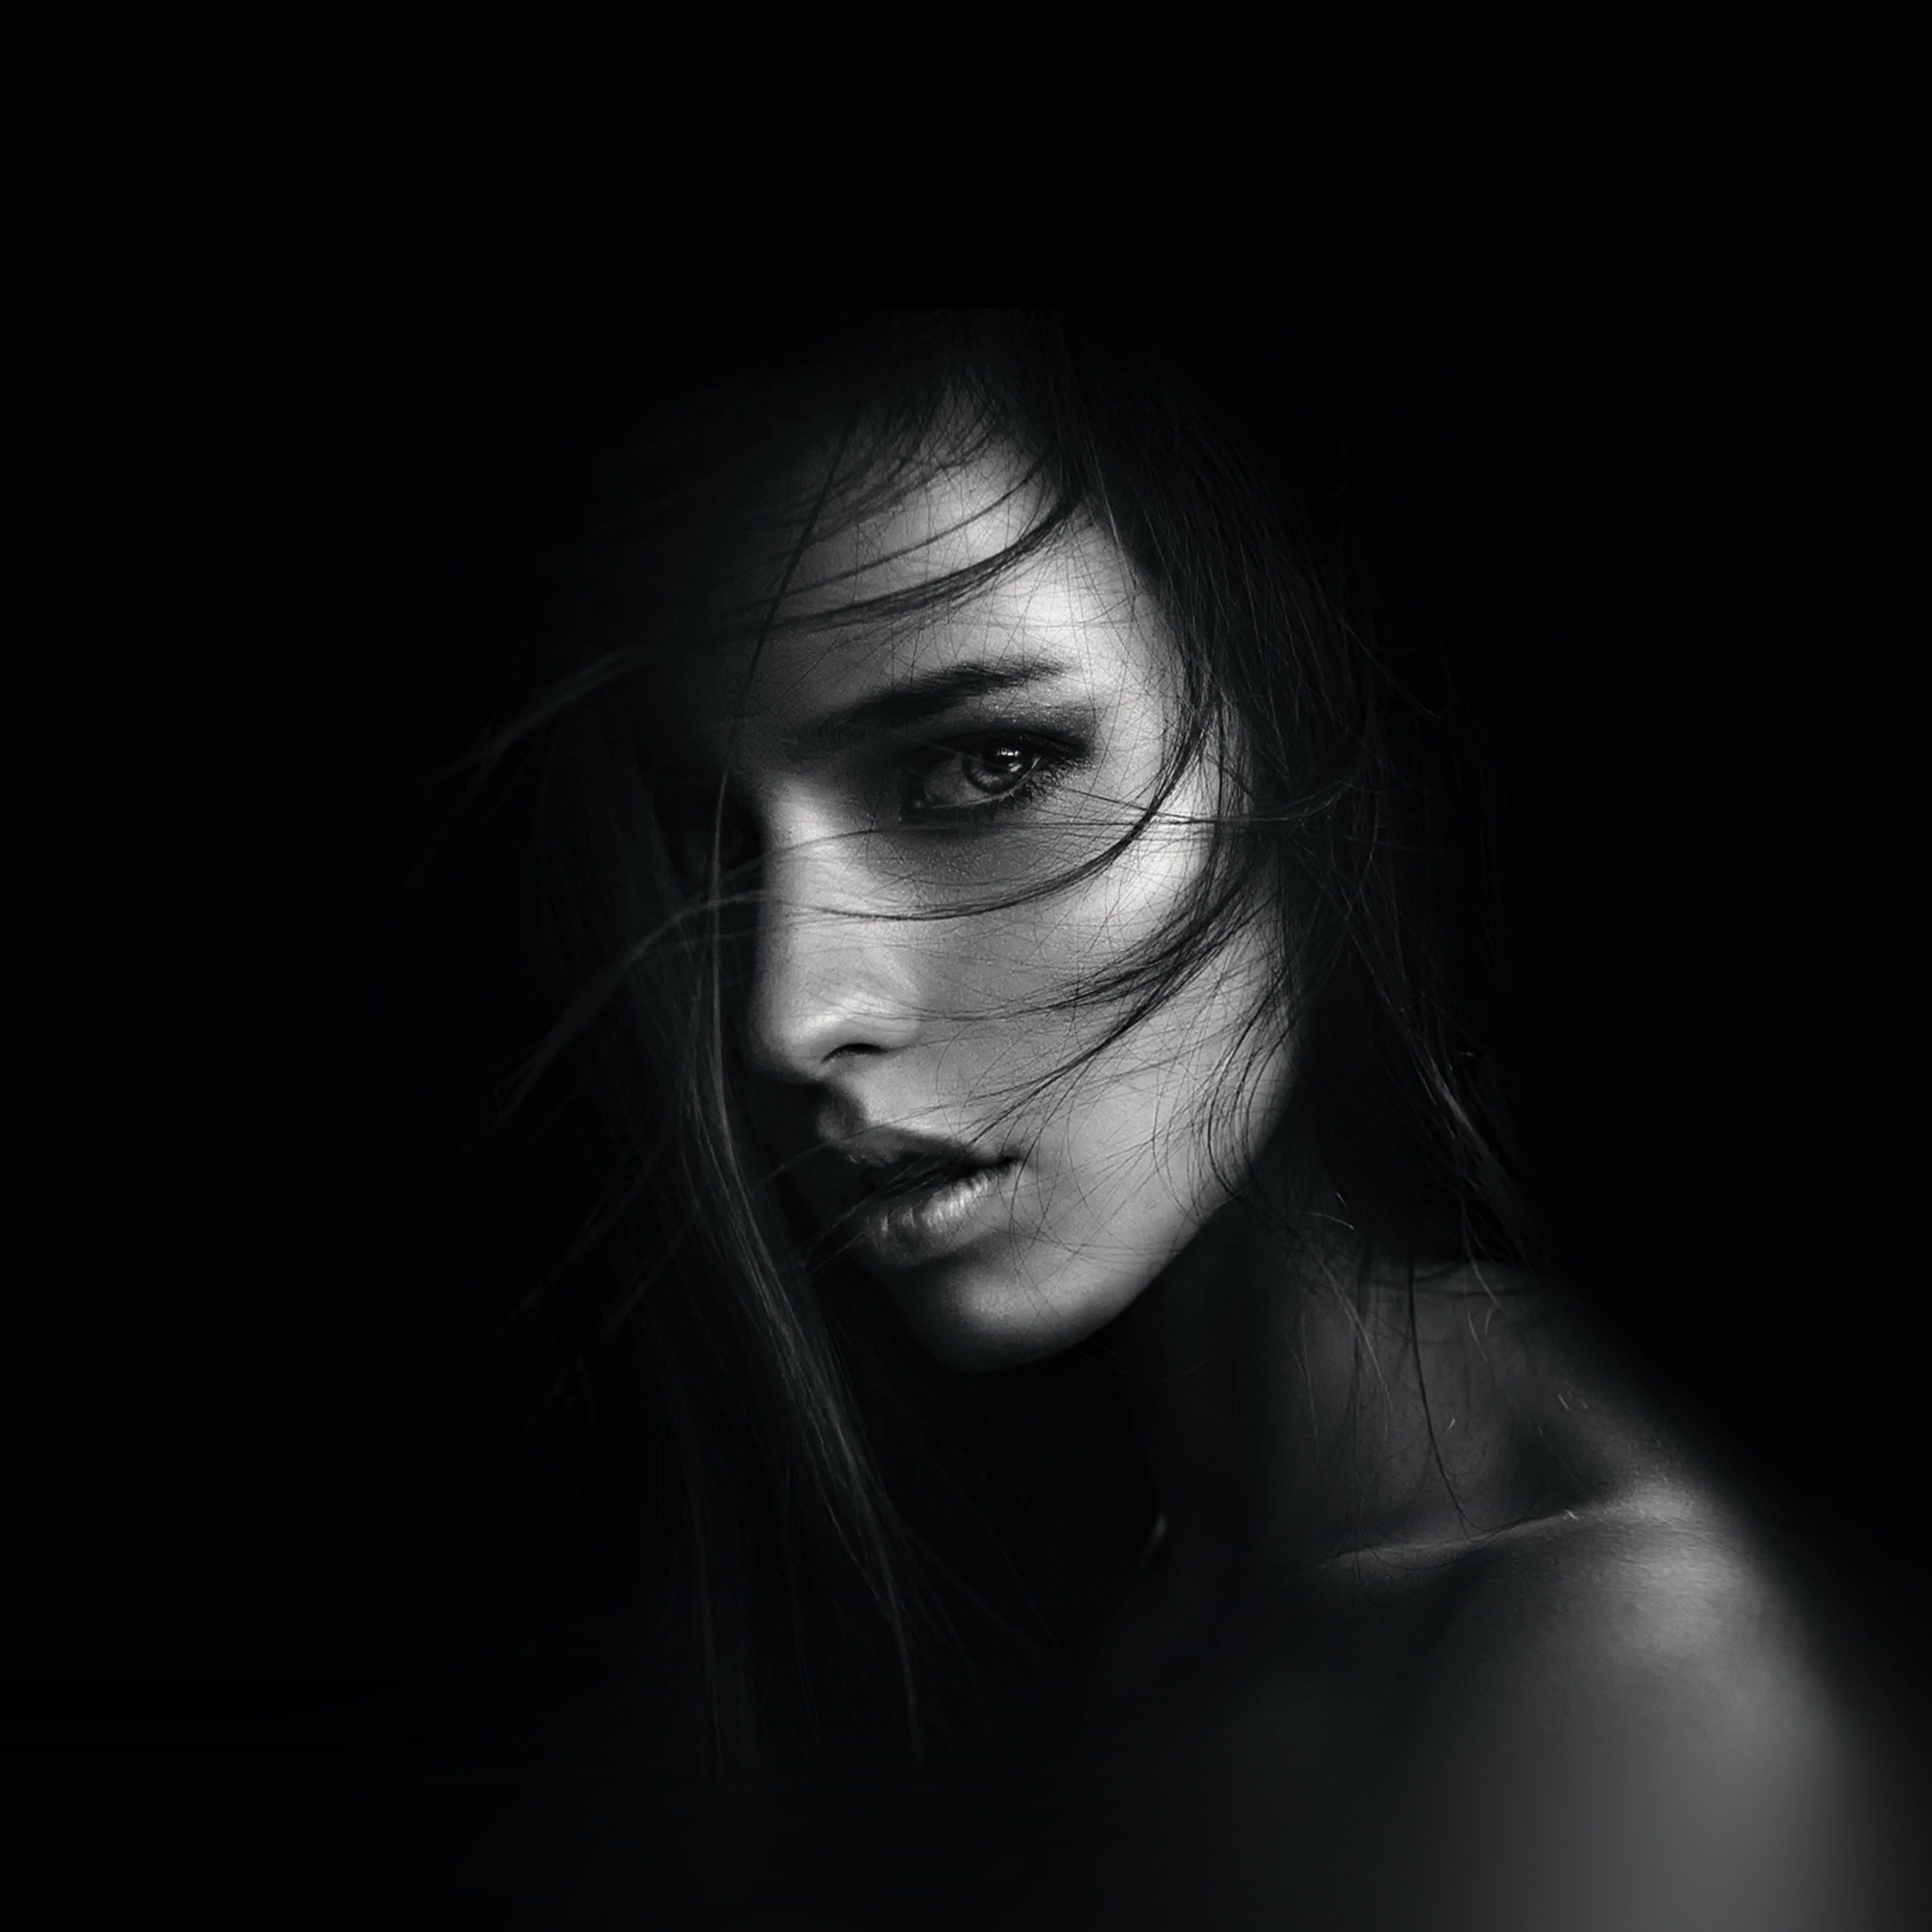 Face Black Wallpapers - Wallpaper Cave